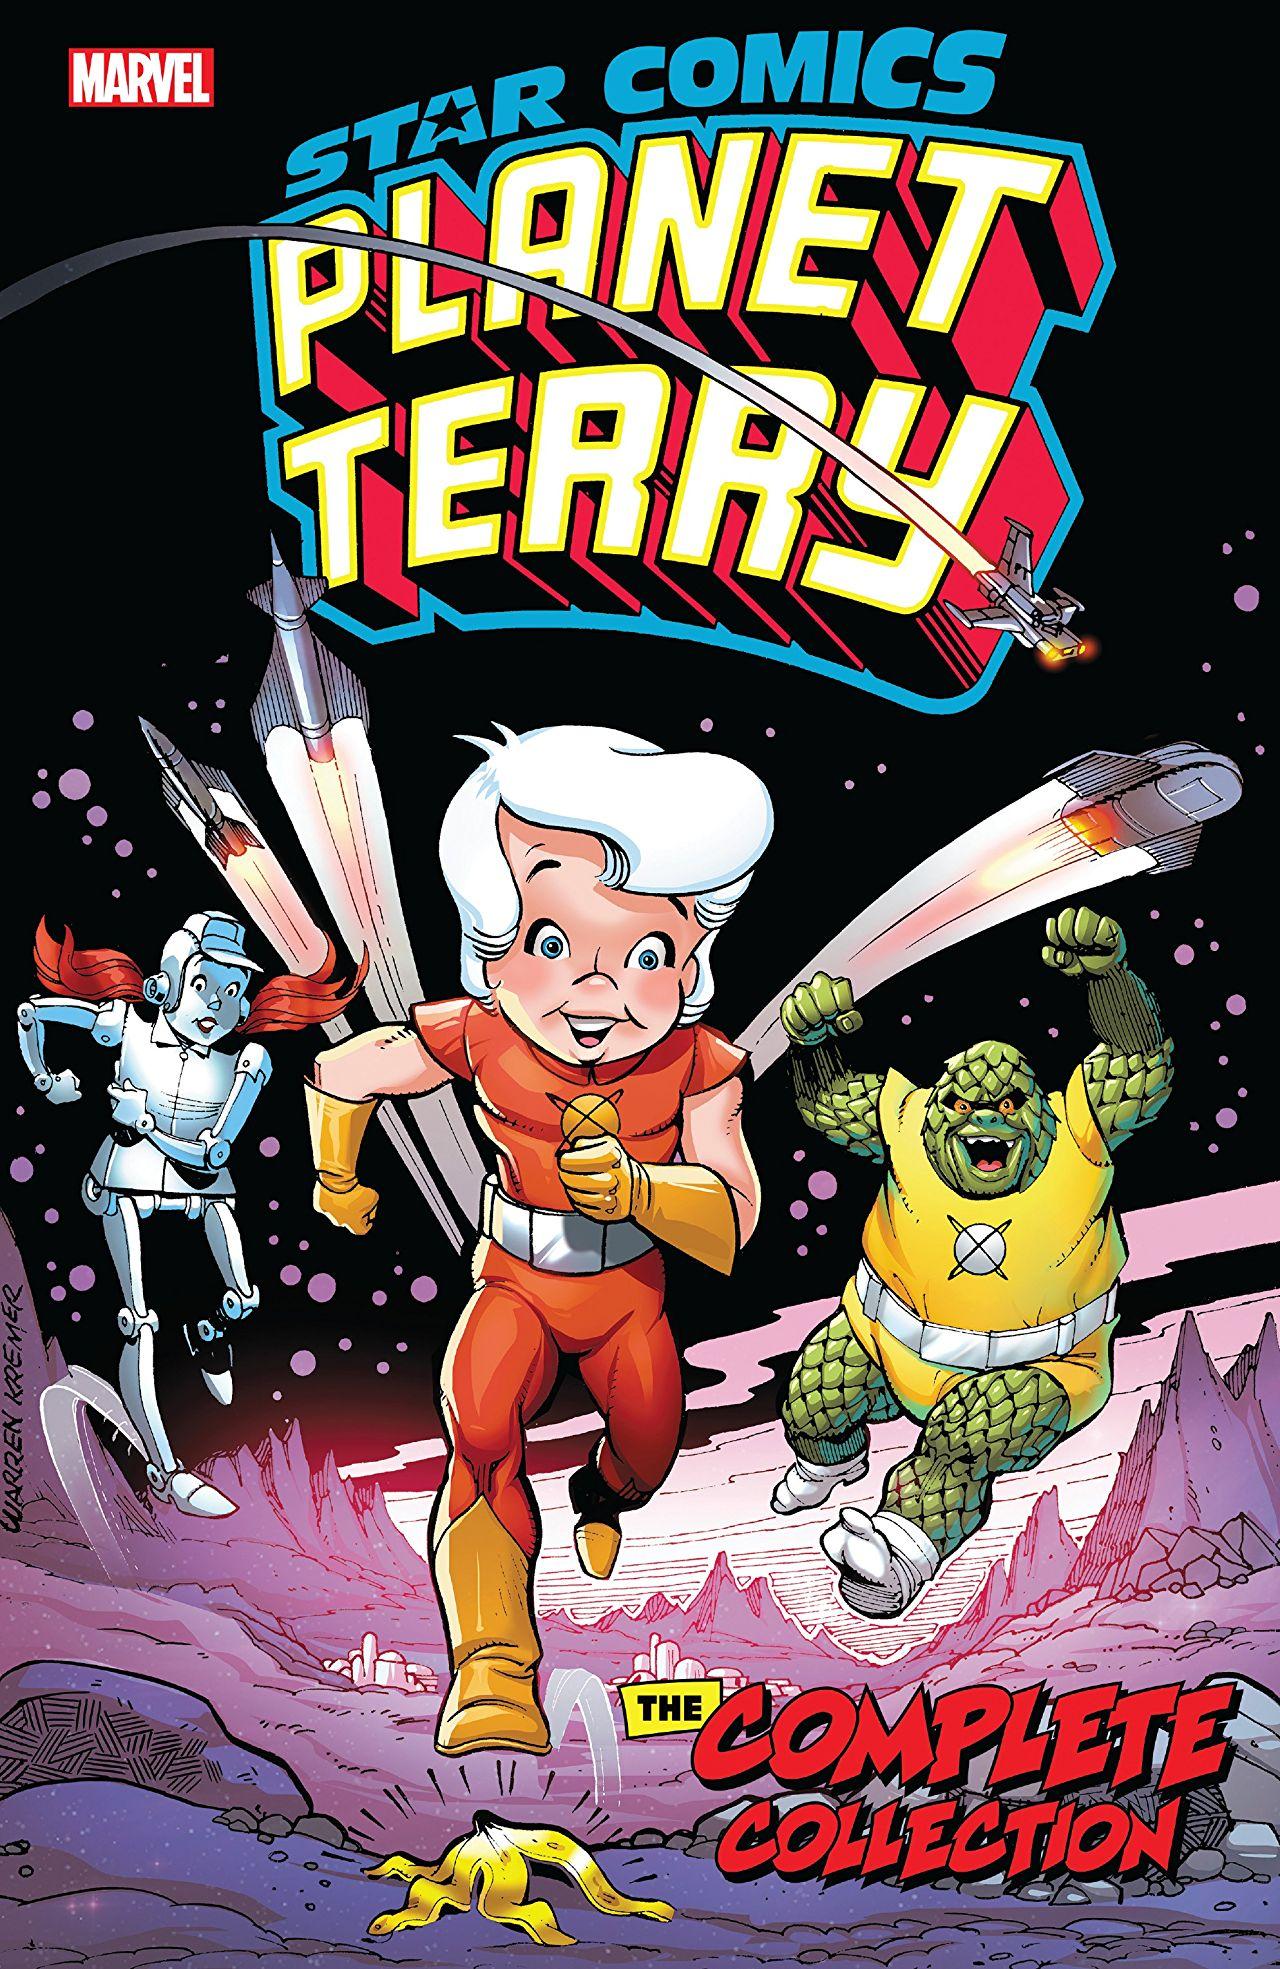 Star Comics: Planet Terry - The Complete Collection Vol. 1 #1